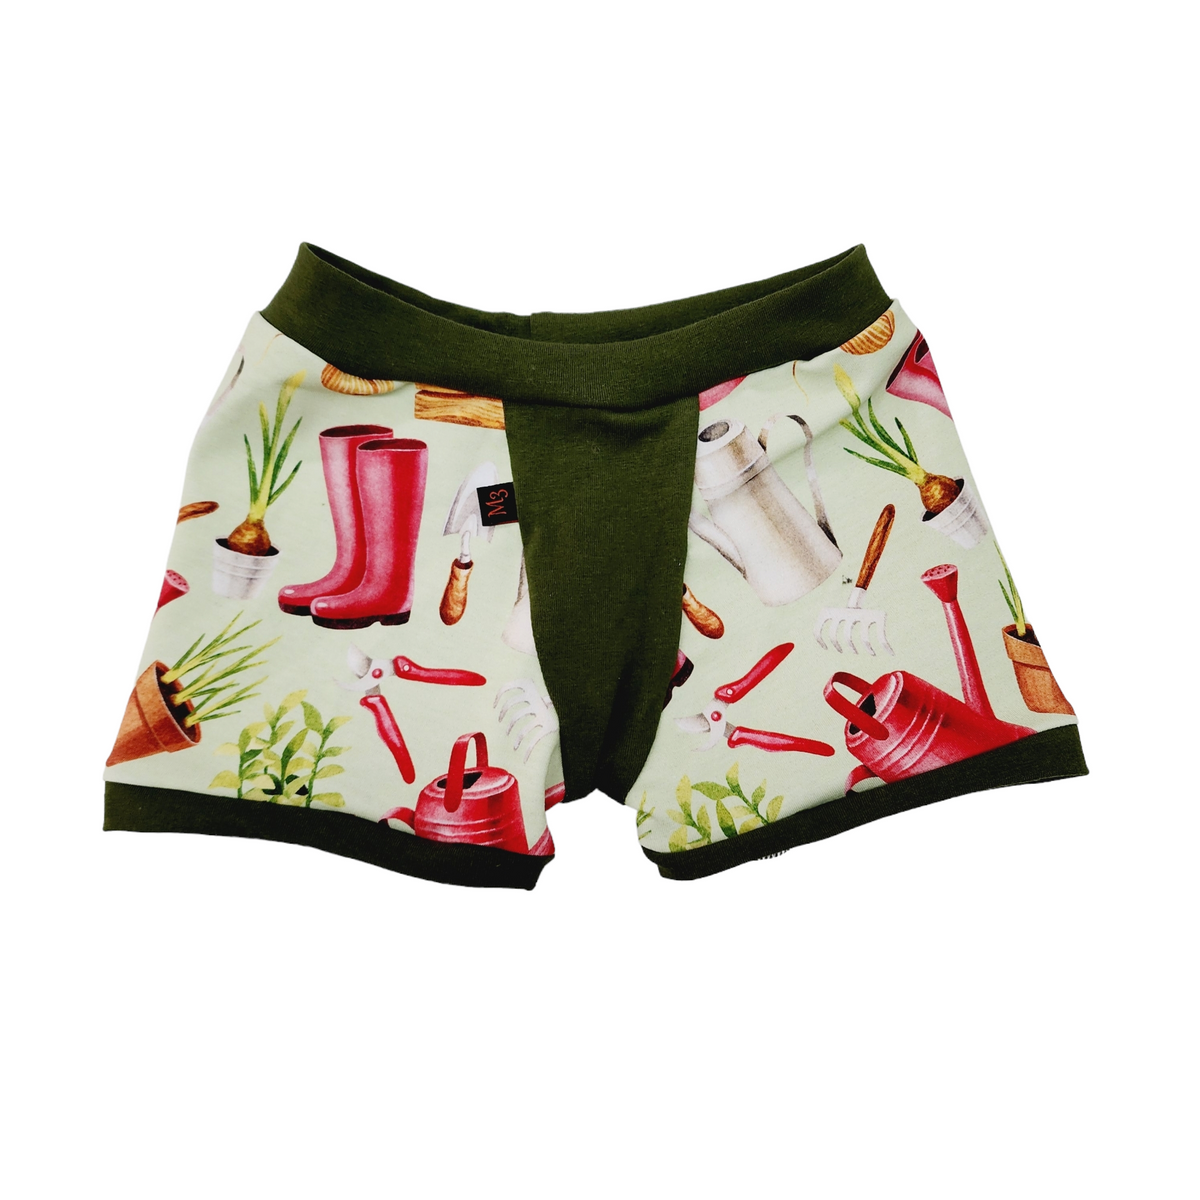 M3 Creations | Children's boxers | Janette Jardine (ready to go)